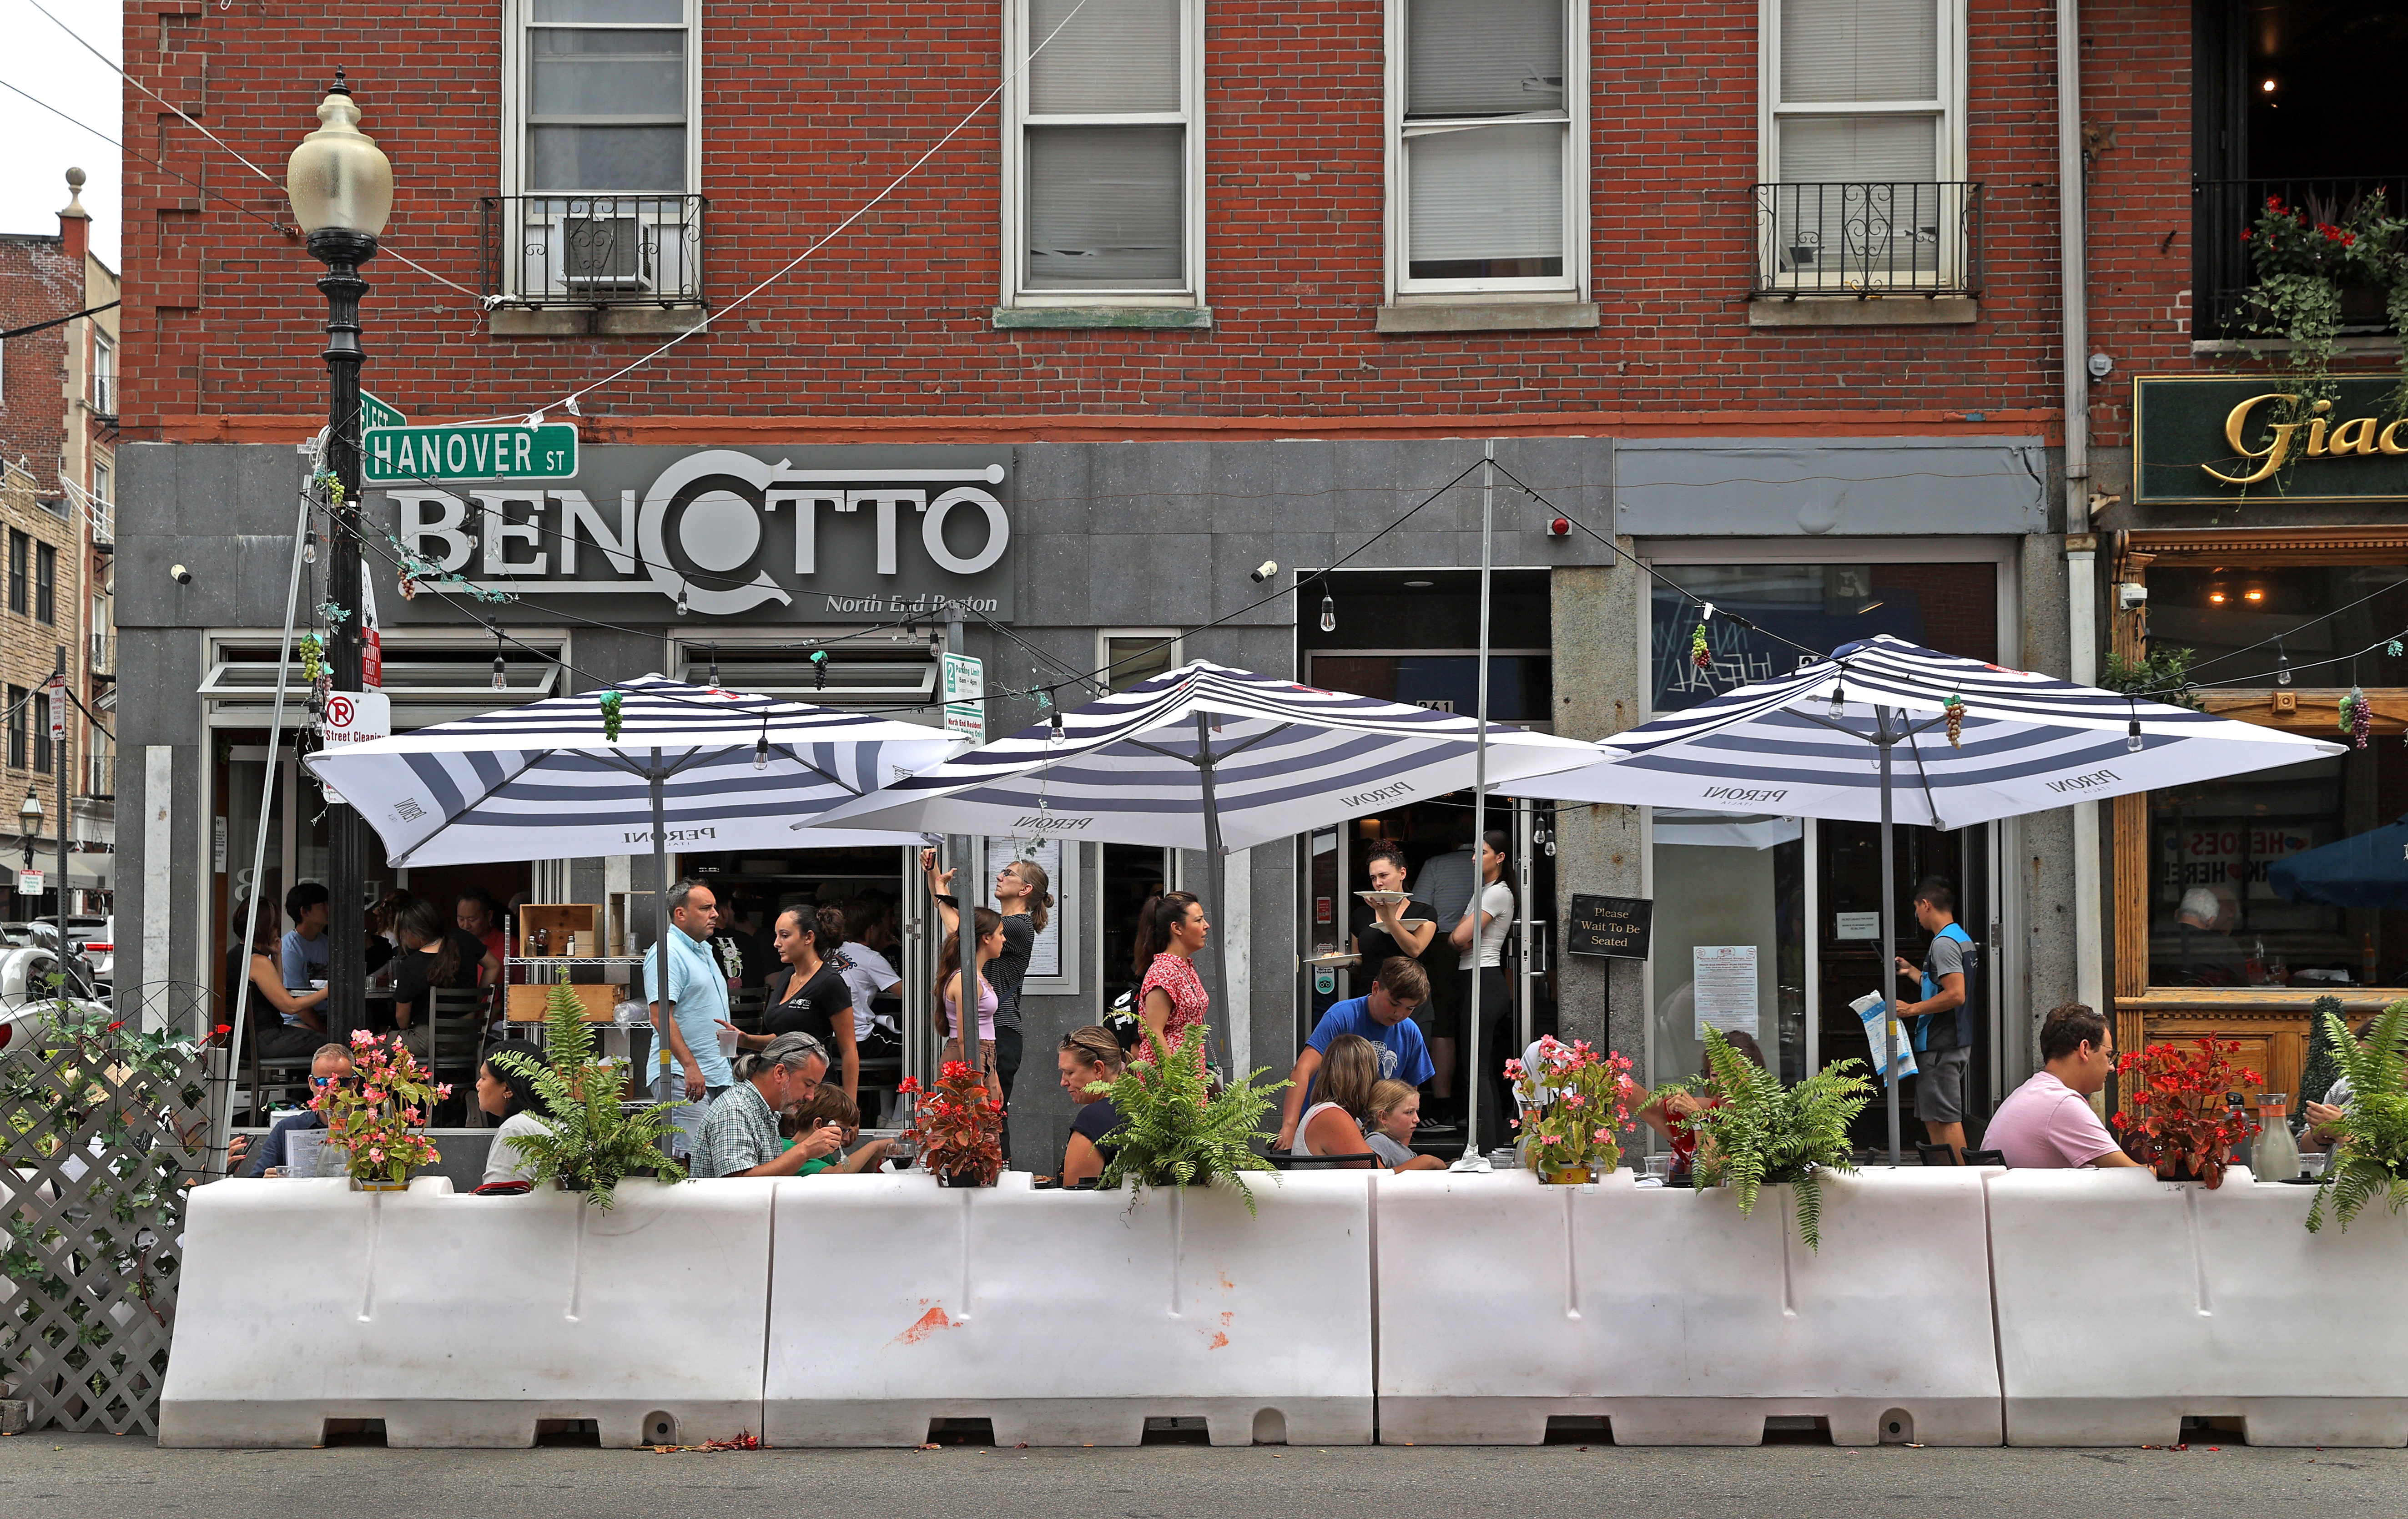 Crowds of people enjoy outdoor dining outside of Bencotto in the North End of Boston.